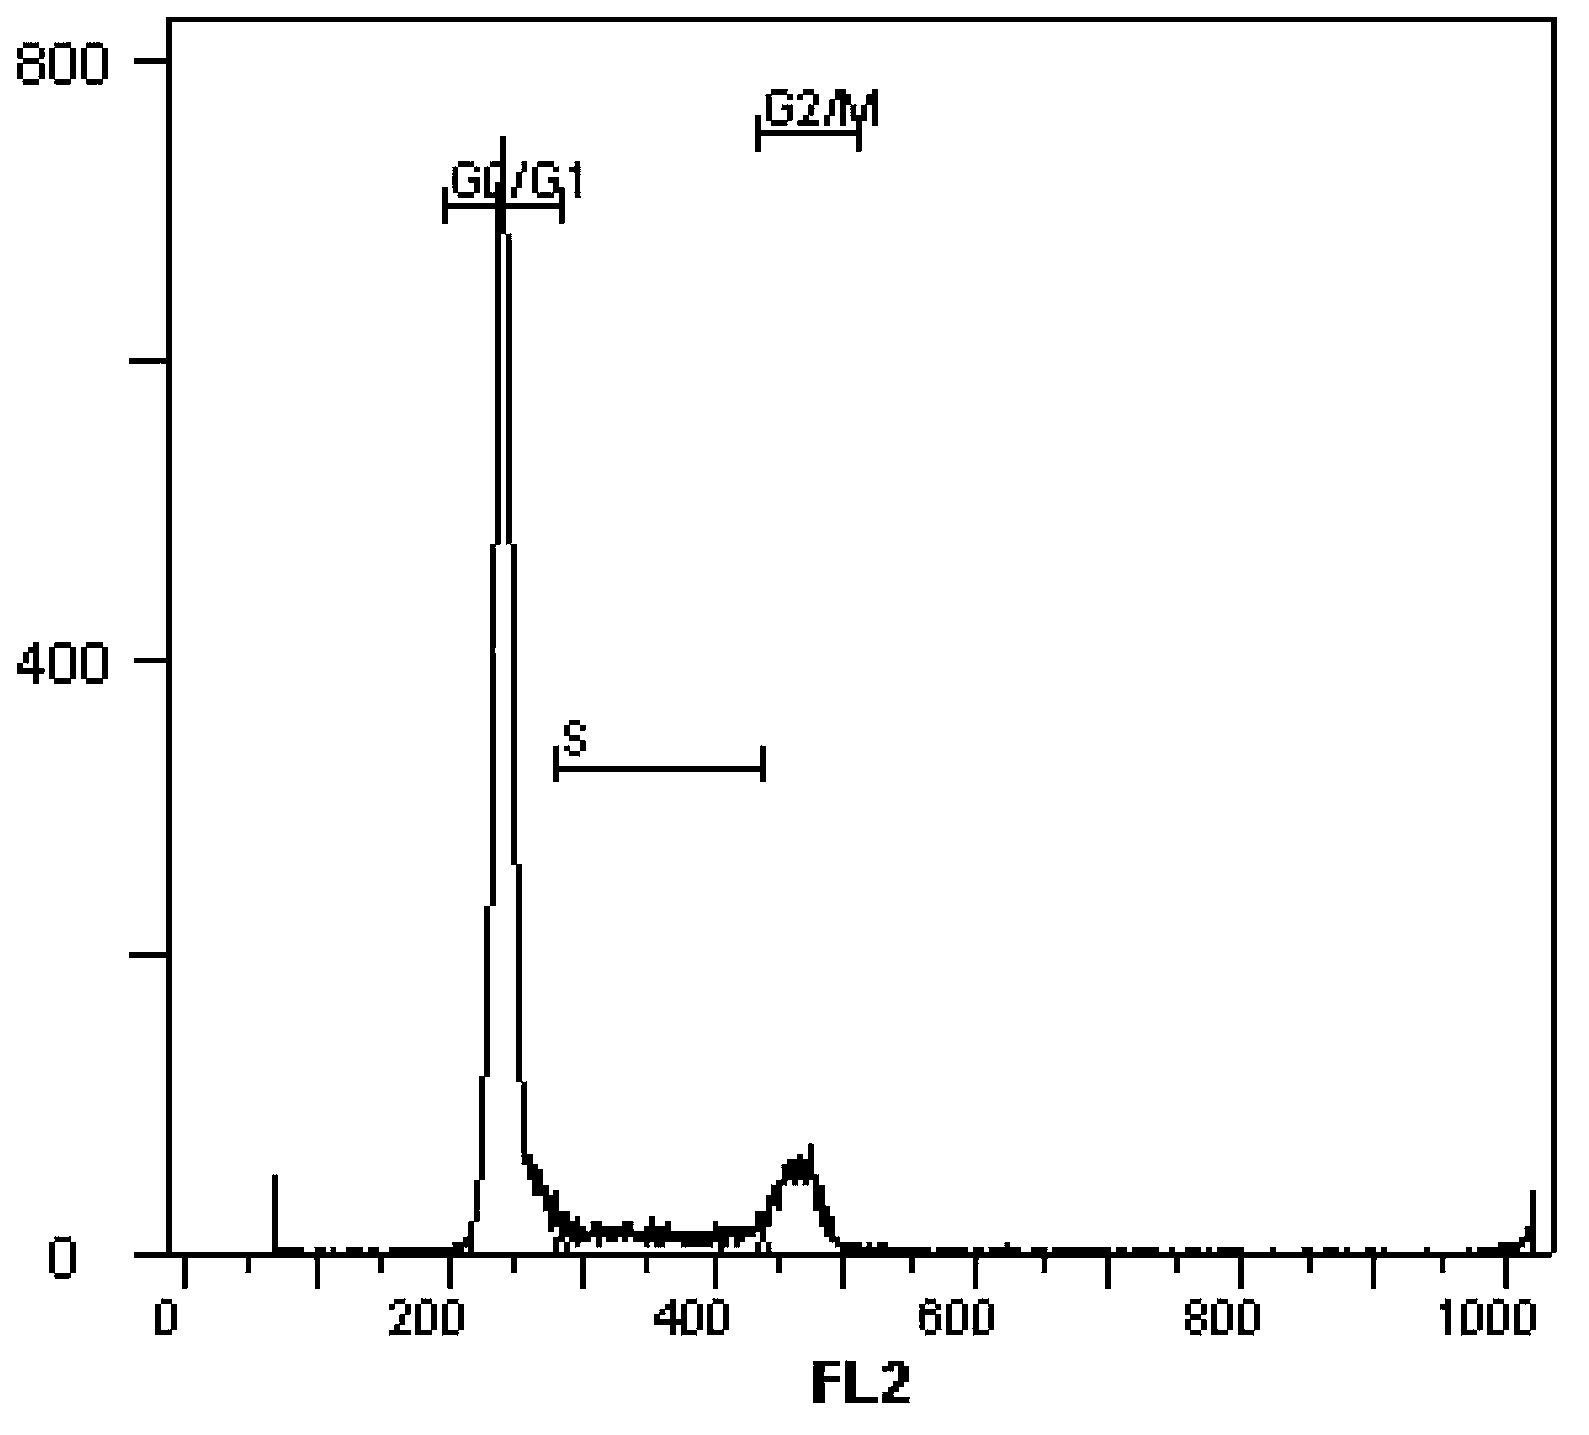 Method for accurately distinguishing cell cycle